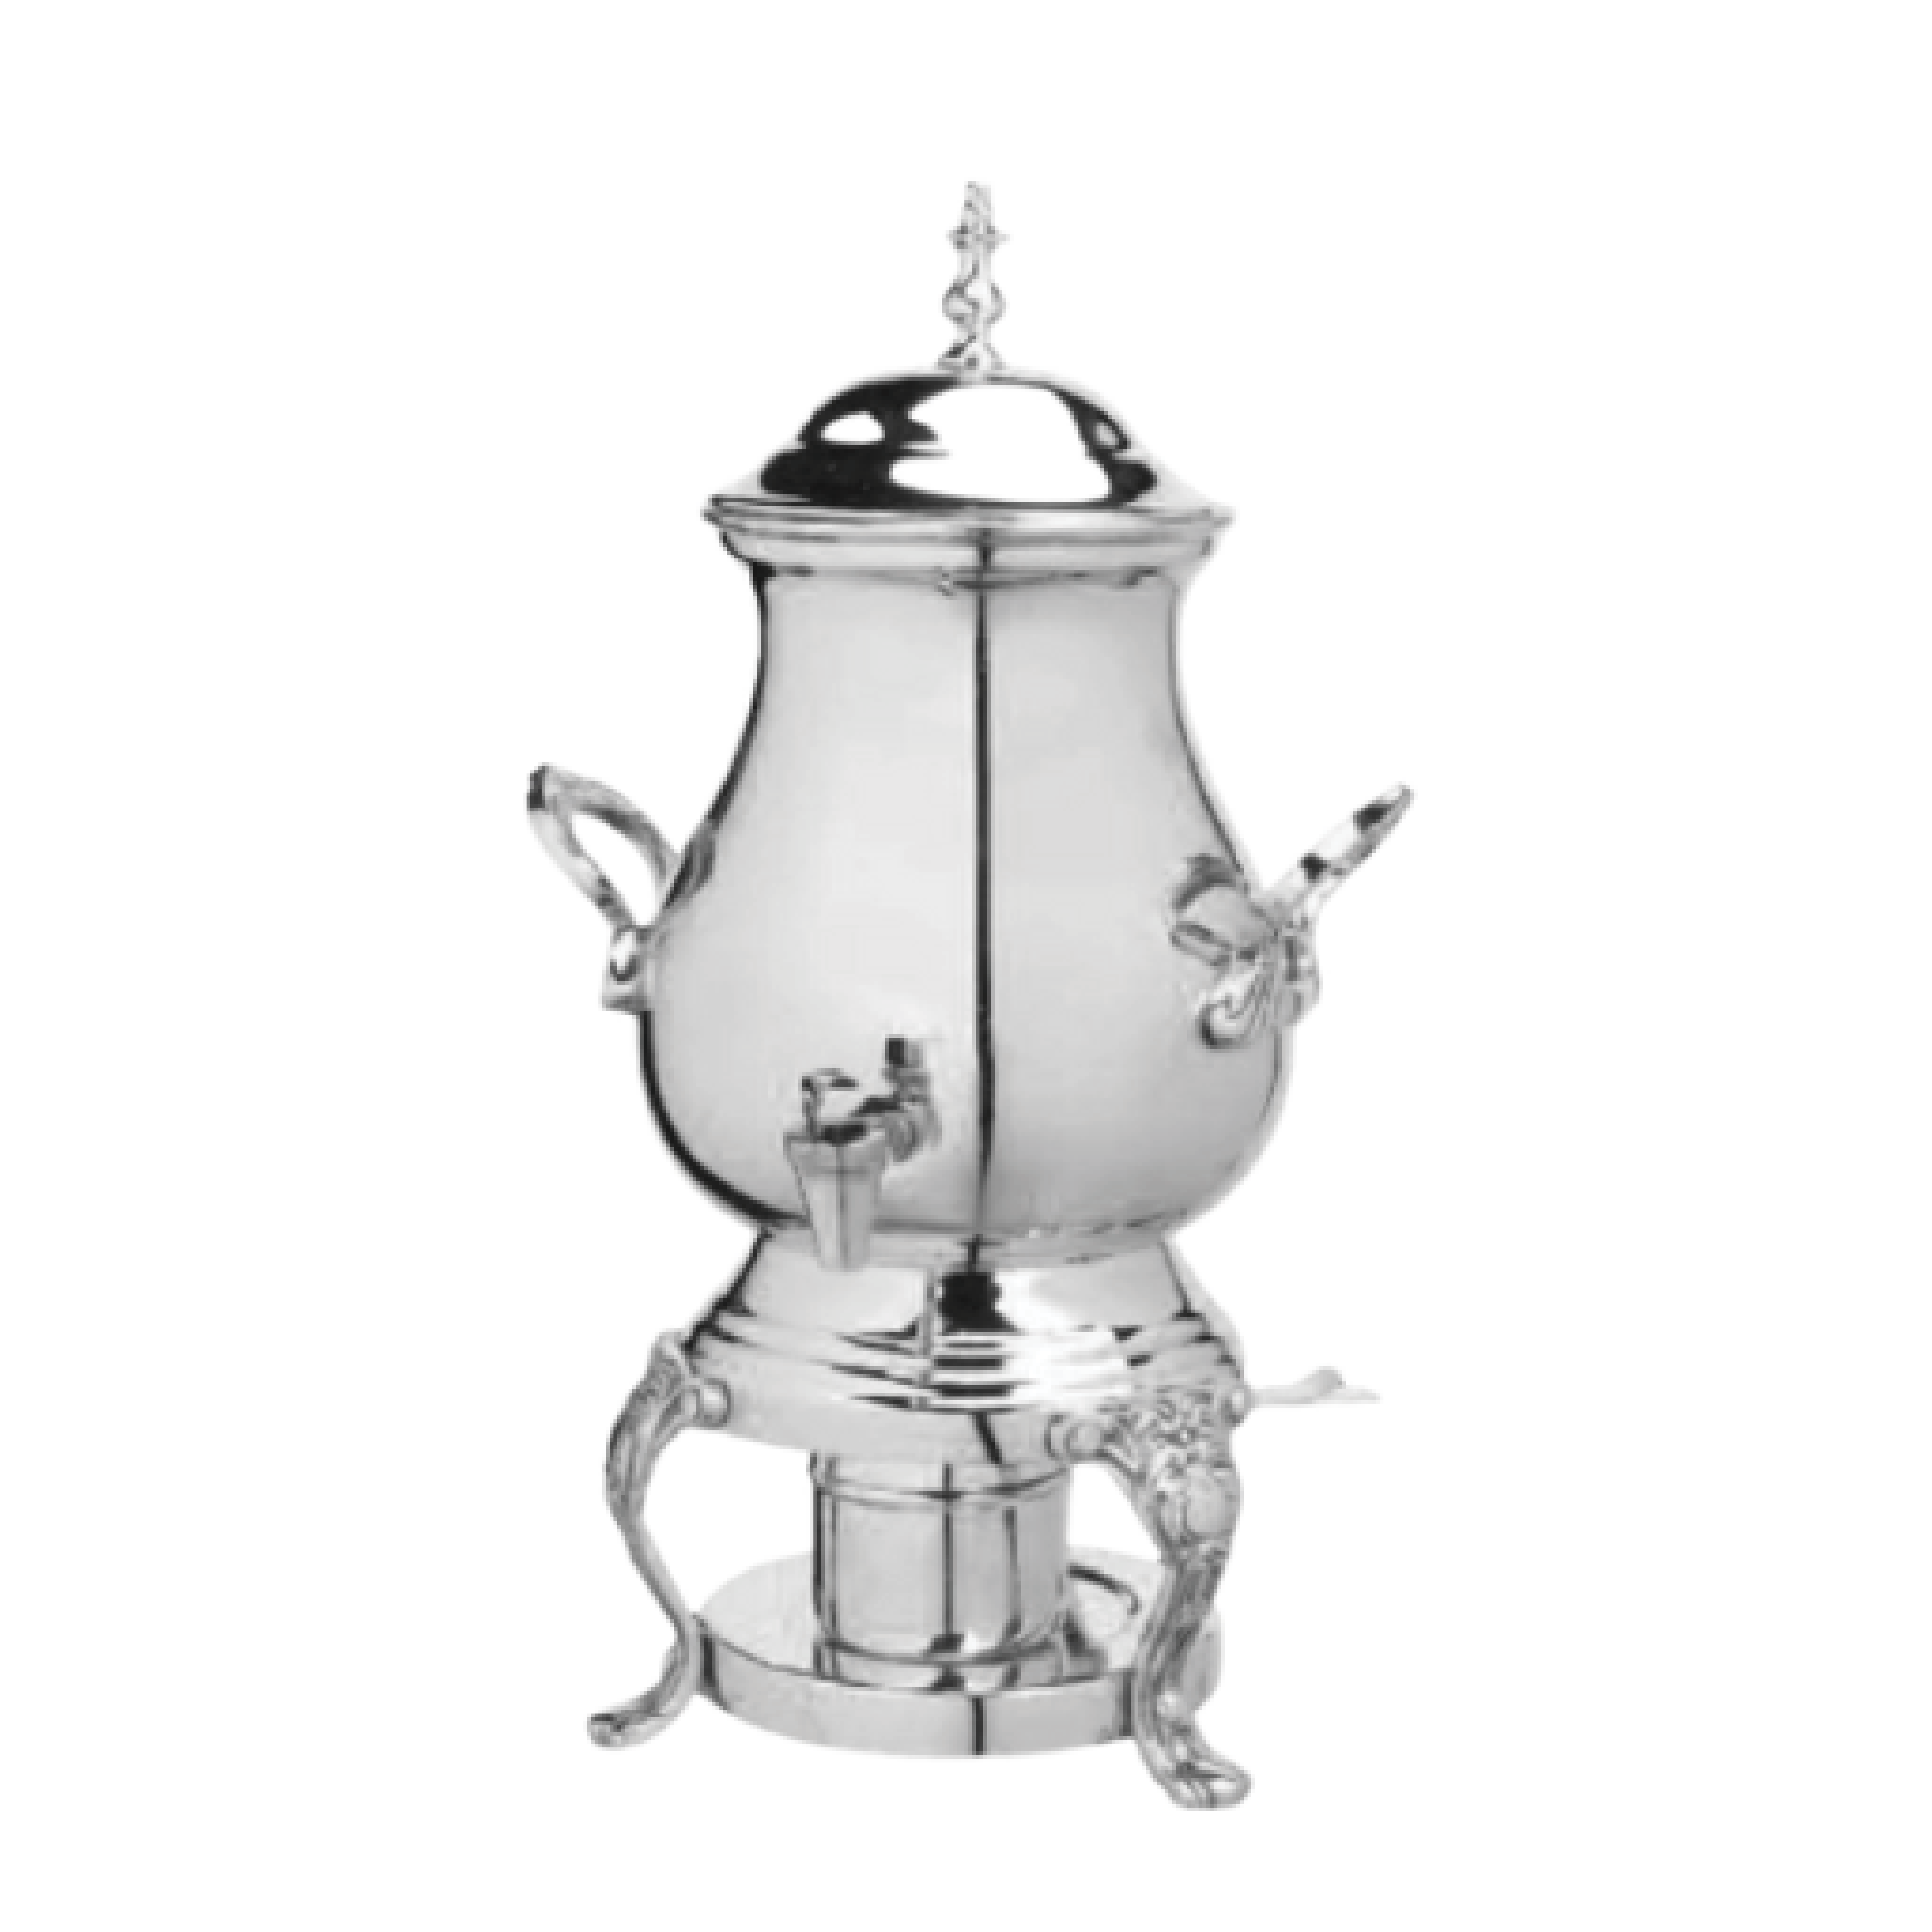 https://pleasebeseated.com/wp-content/uploads/2022/11/silverplated-coffee-urn.png